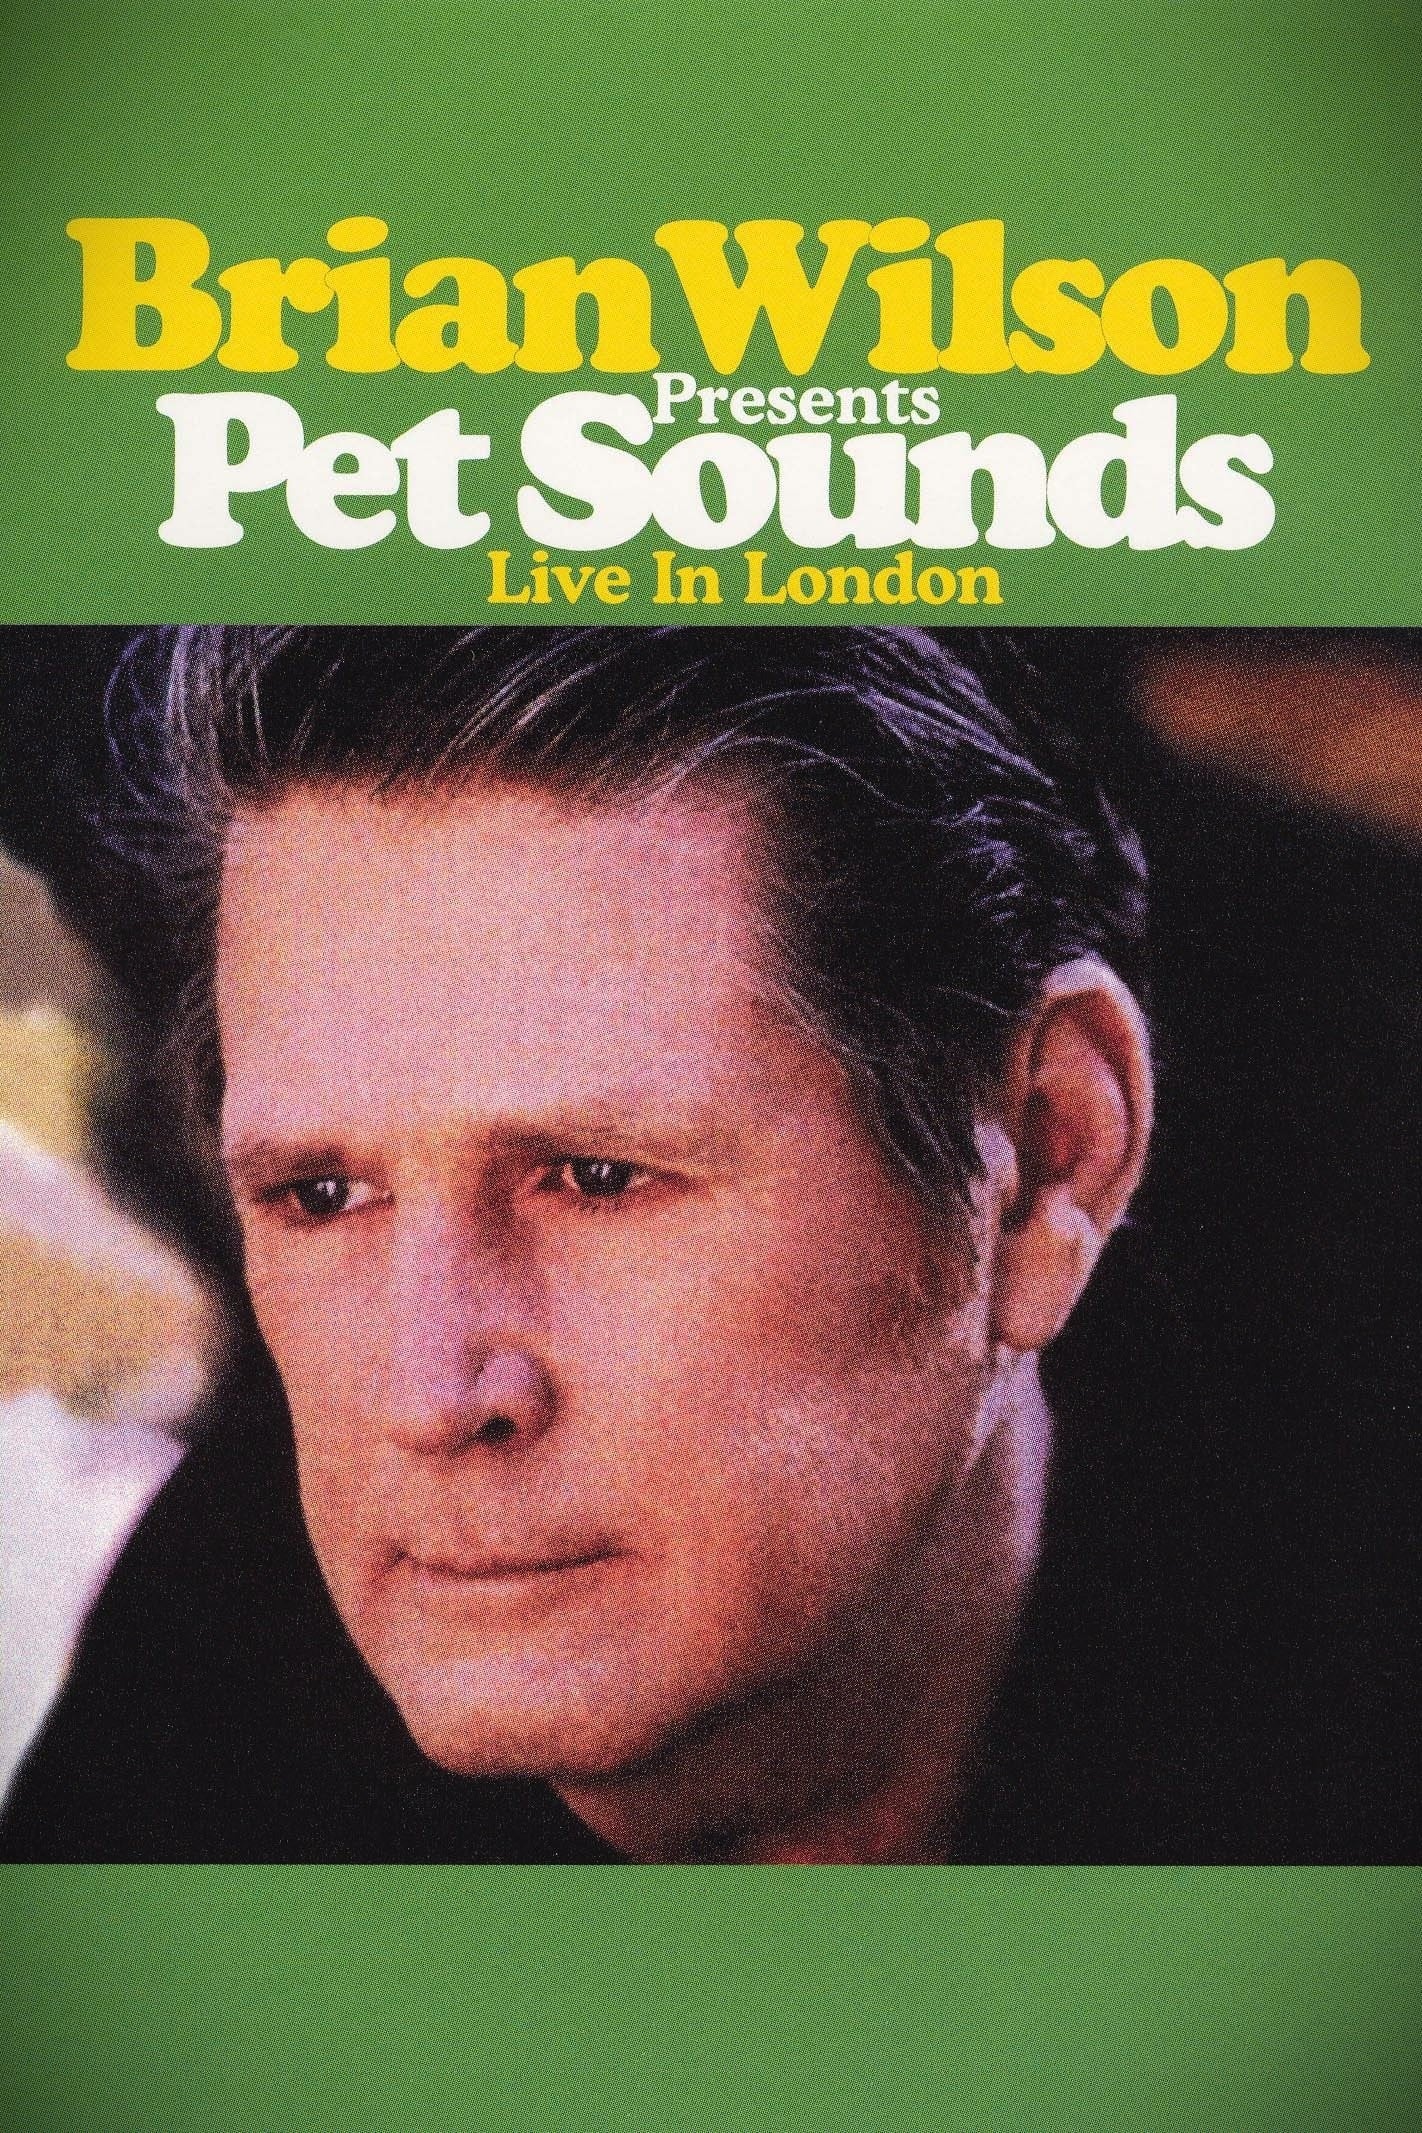 Brian Wilson Presents: Pet Sounds Live in London